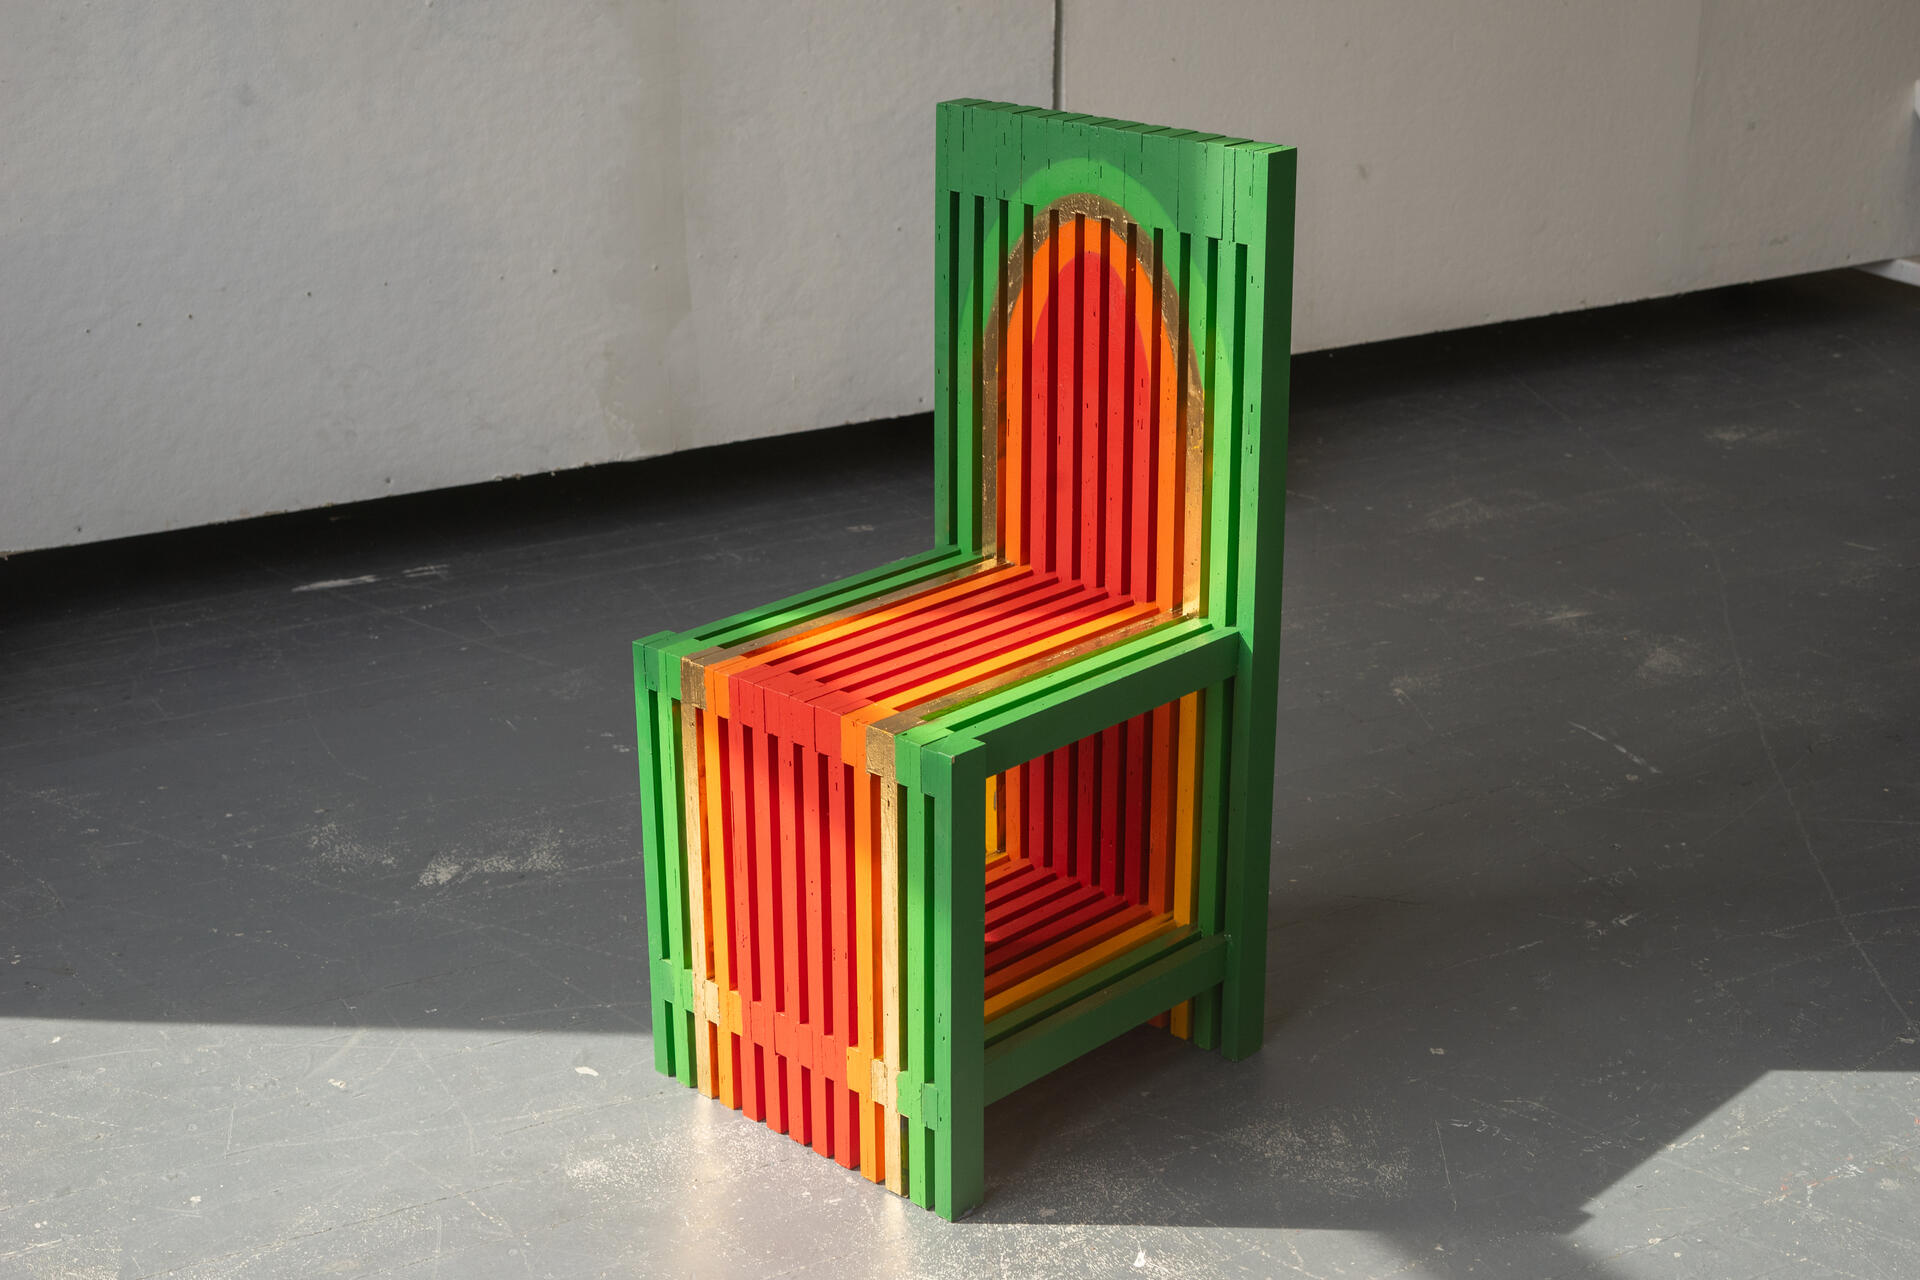 A colorful slatted chair painted in a colorful warm gradient sits in the middle of a stark room.